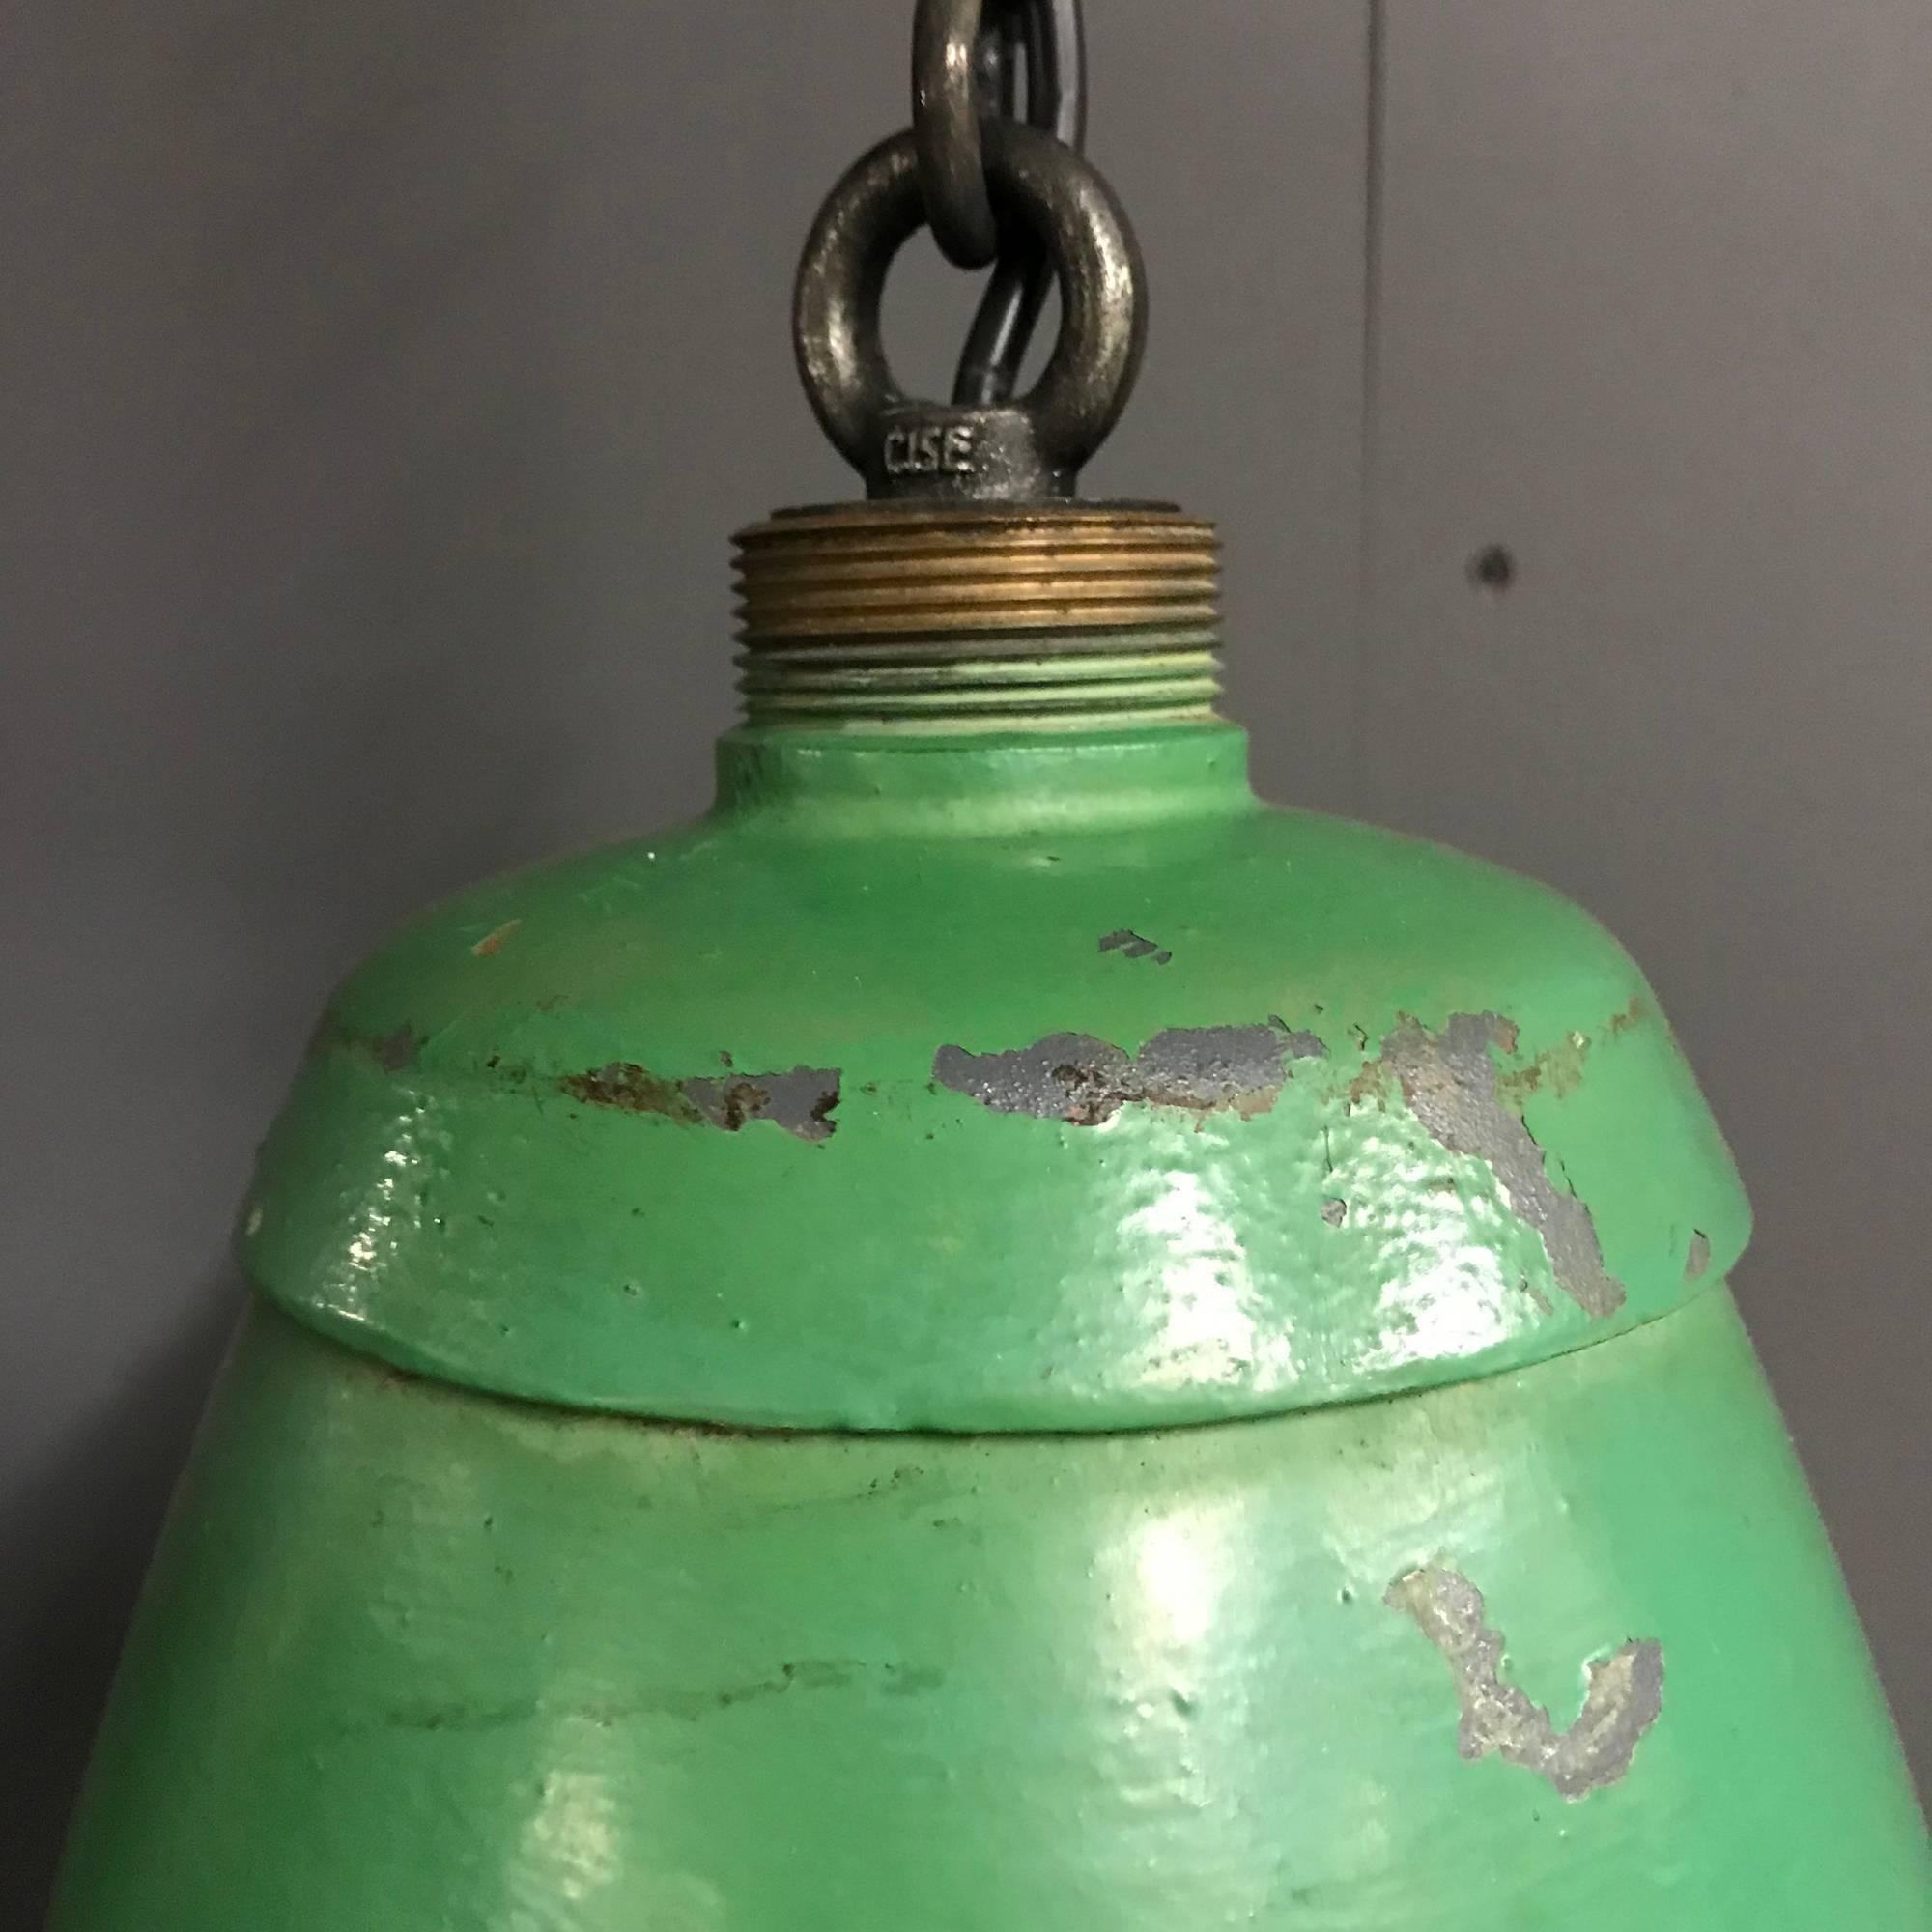 Green metal factory pendant light. Made during het early 20th century. Has been converted to E27 with a porcelain Socket. Remains in good condition. One Pieces is stock.
Early 20th century
Size of this 1-piece Green metal factory pendant light
40